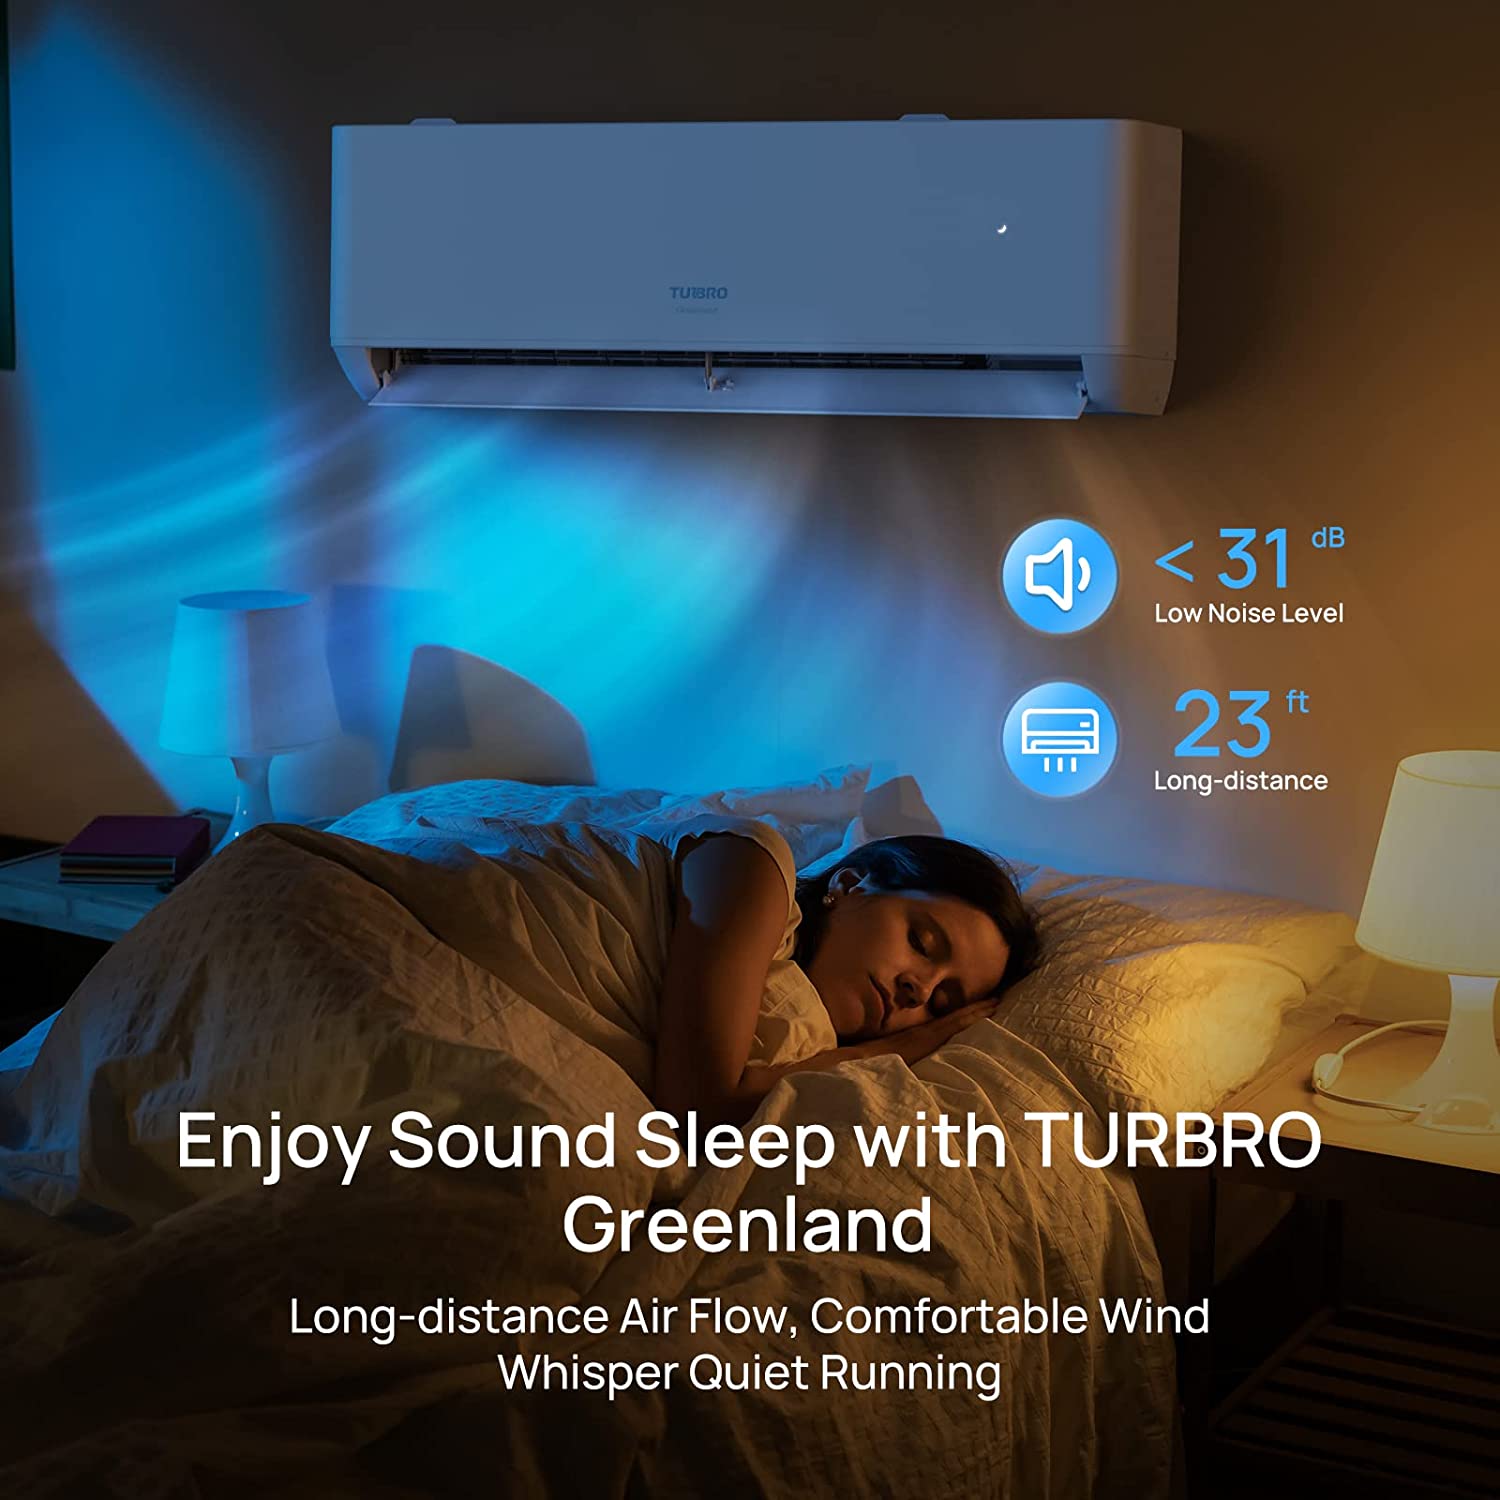 TURBRO 18,000 BTU Ductless Mini Split Inverter AC with Heat Pump, 22 SEER2, 230V, WiFi-Enabled, Cools up to 1,200 Sq.Ft, Energy Star, Greenland Series - image 2 of 7